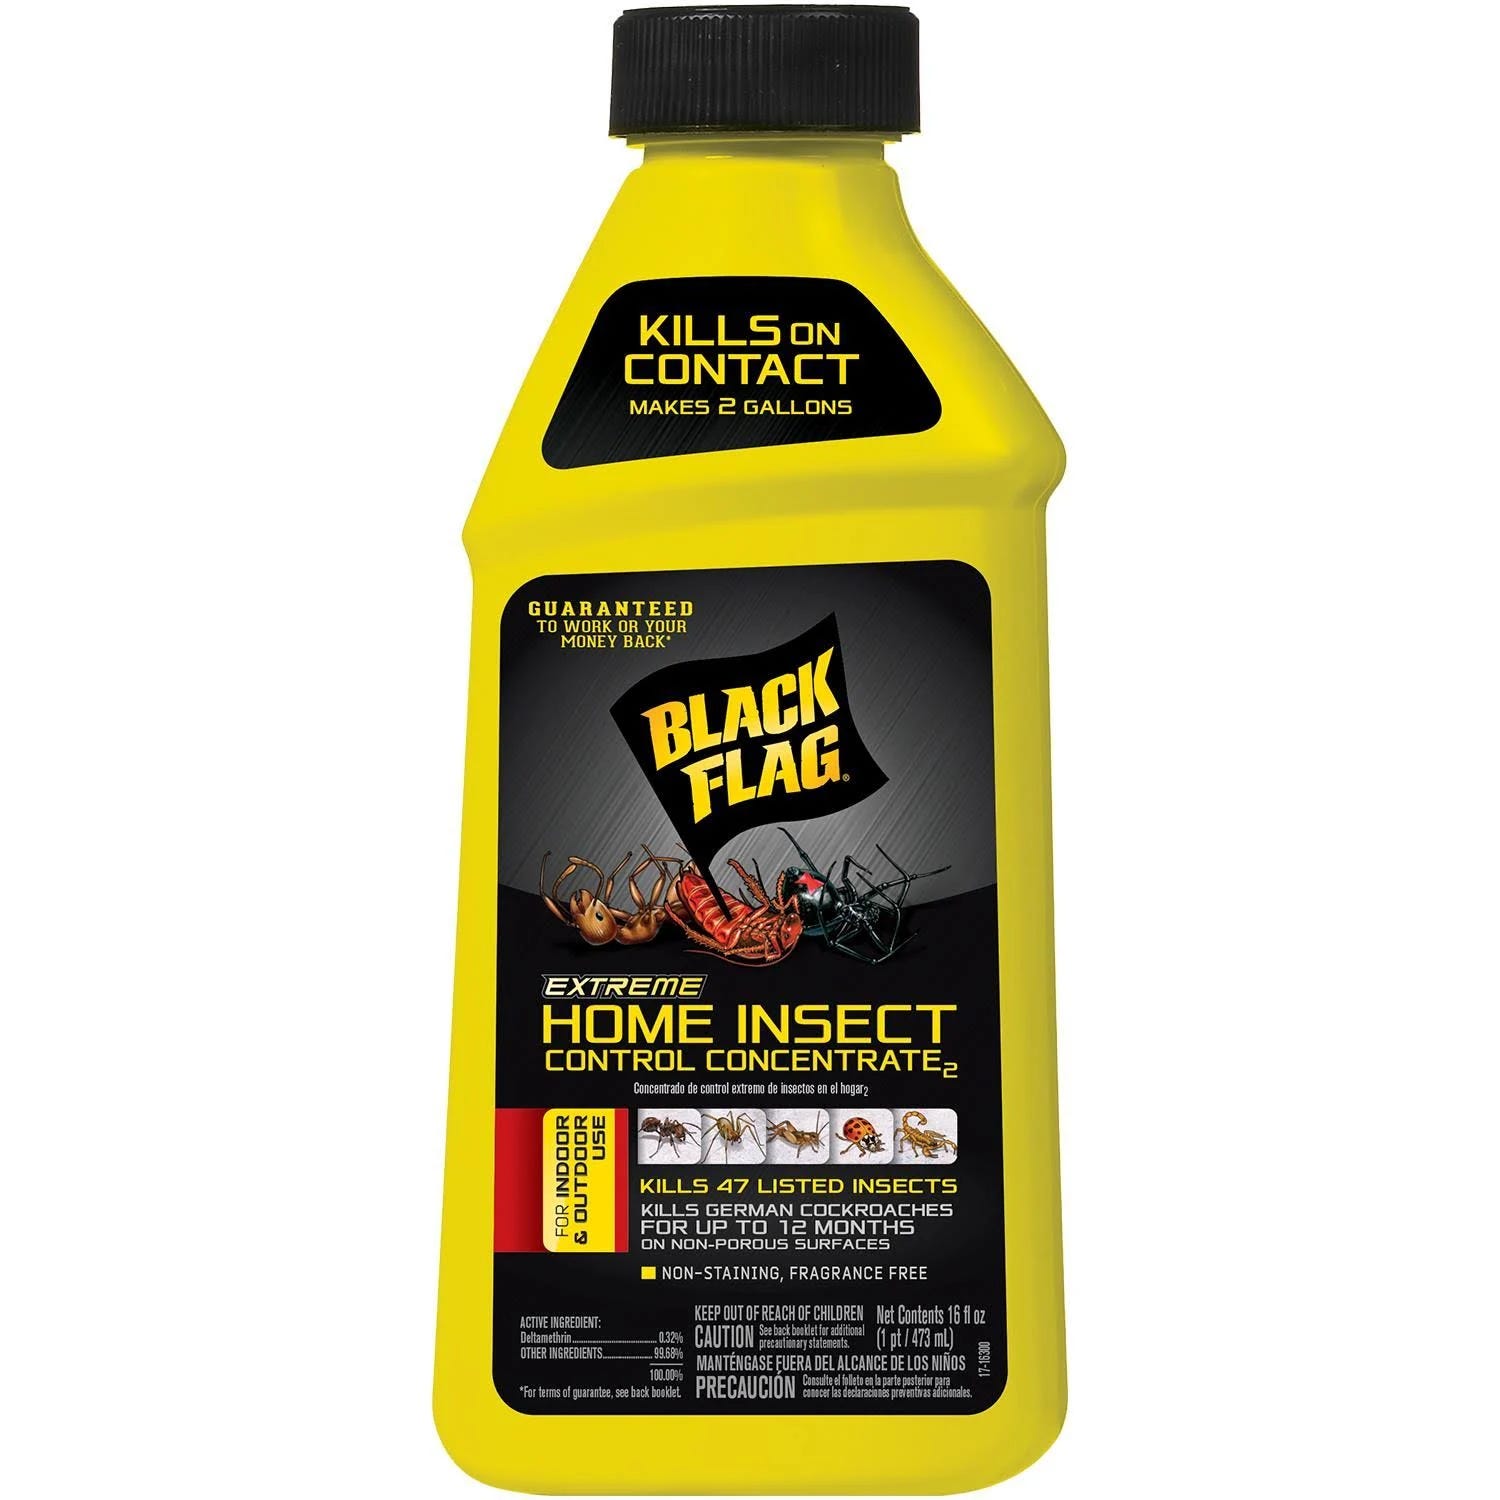 Black Flag Extreme Roach Spray for Home Insect Control | Image